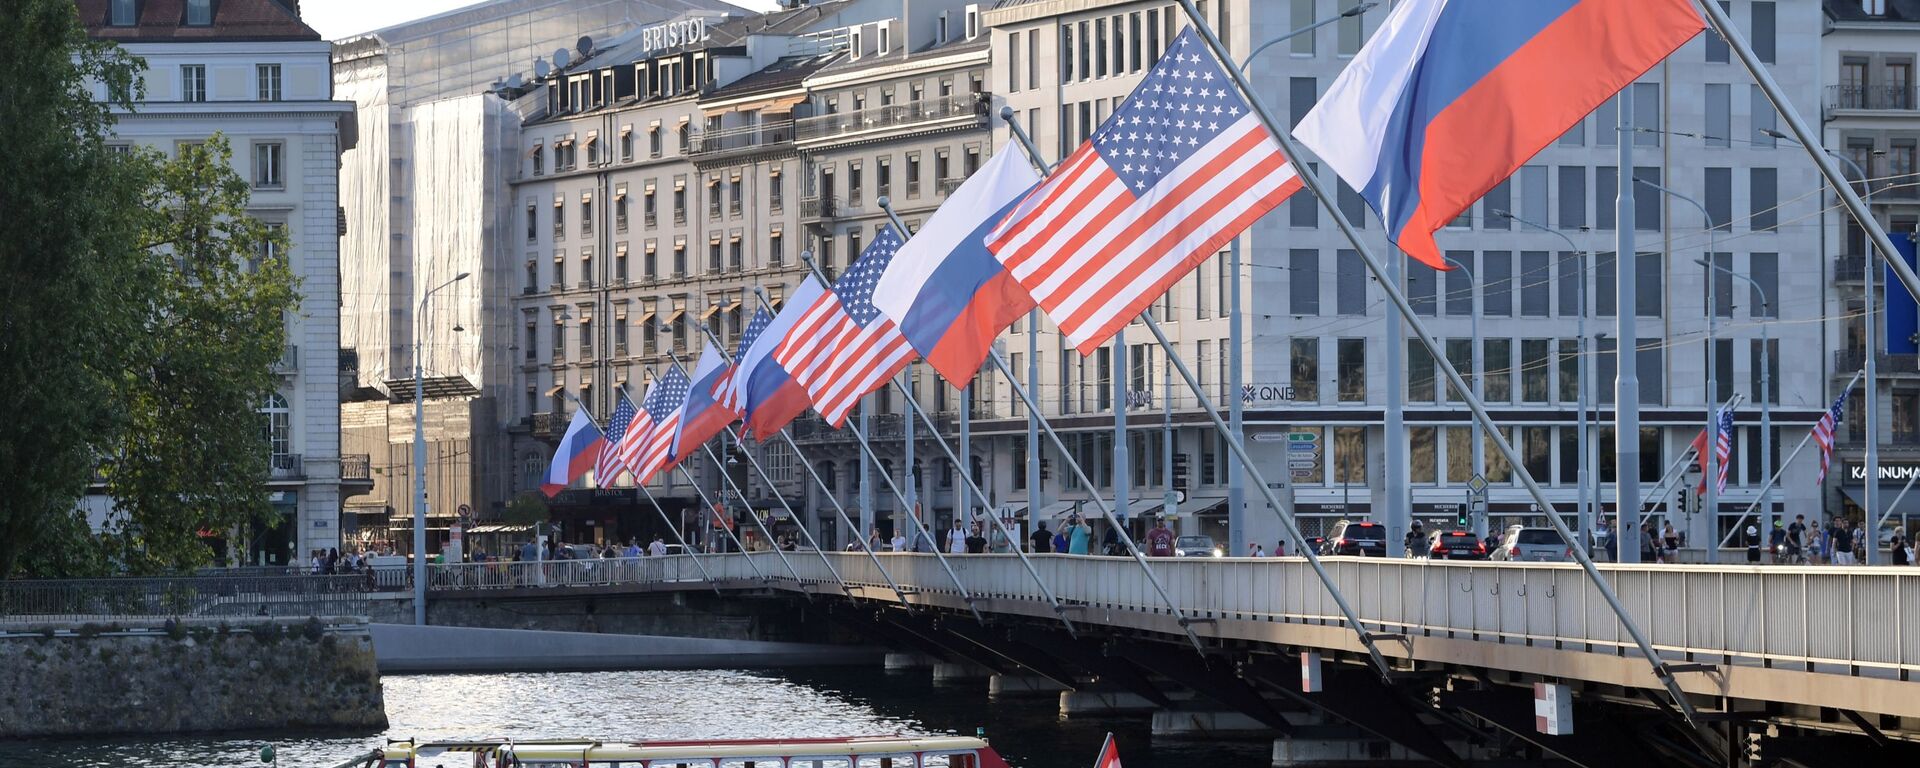 A view shows Mont-Blanc bridge decorated with flags of the USA and Russia ahead of the June 16 summit between U.S. President Joe Biden and Russian President Vladimir Putin, in Geneva, Switzerland - Sputnik International, 1920, 30.12.2021